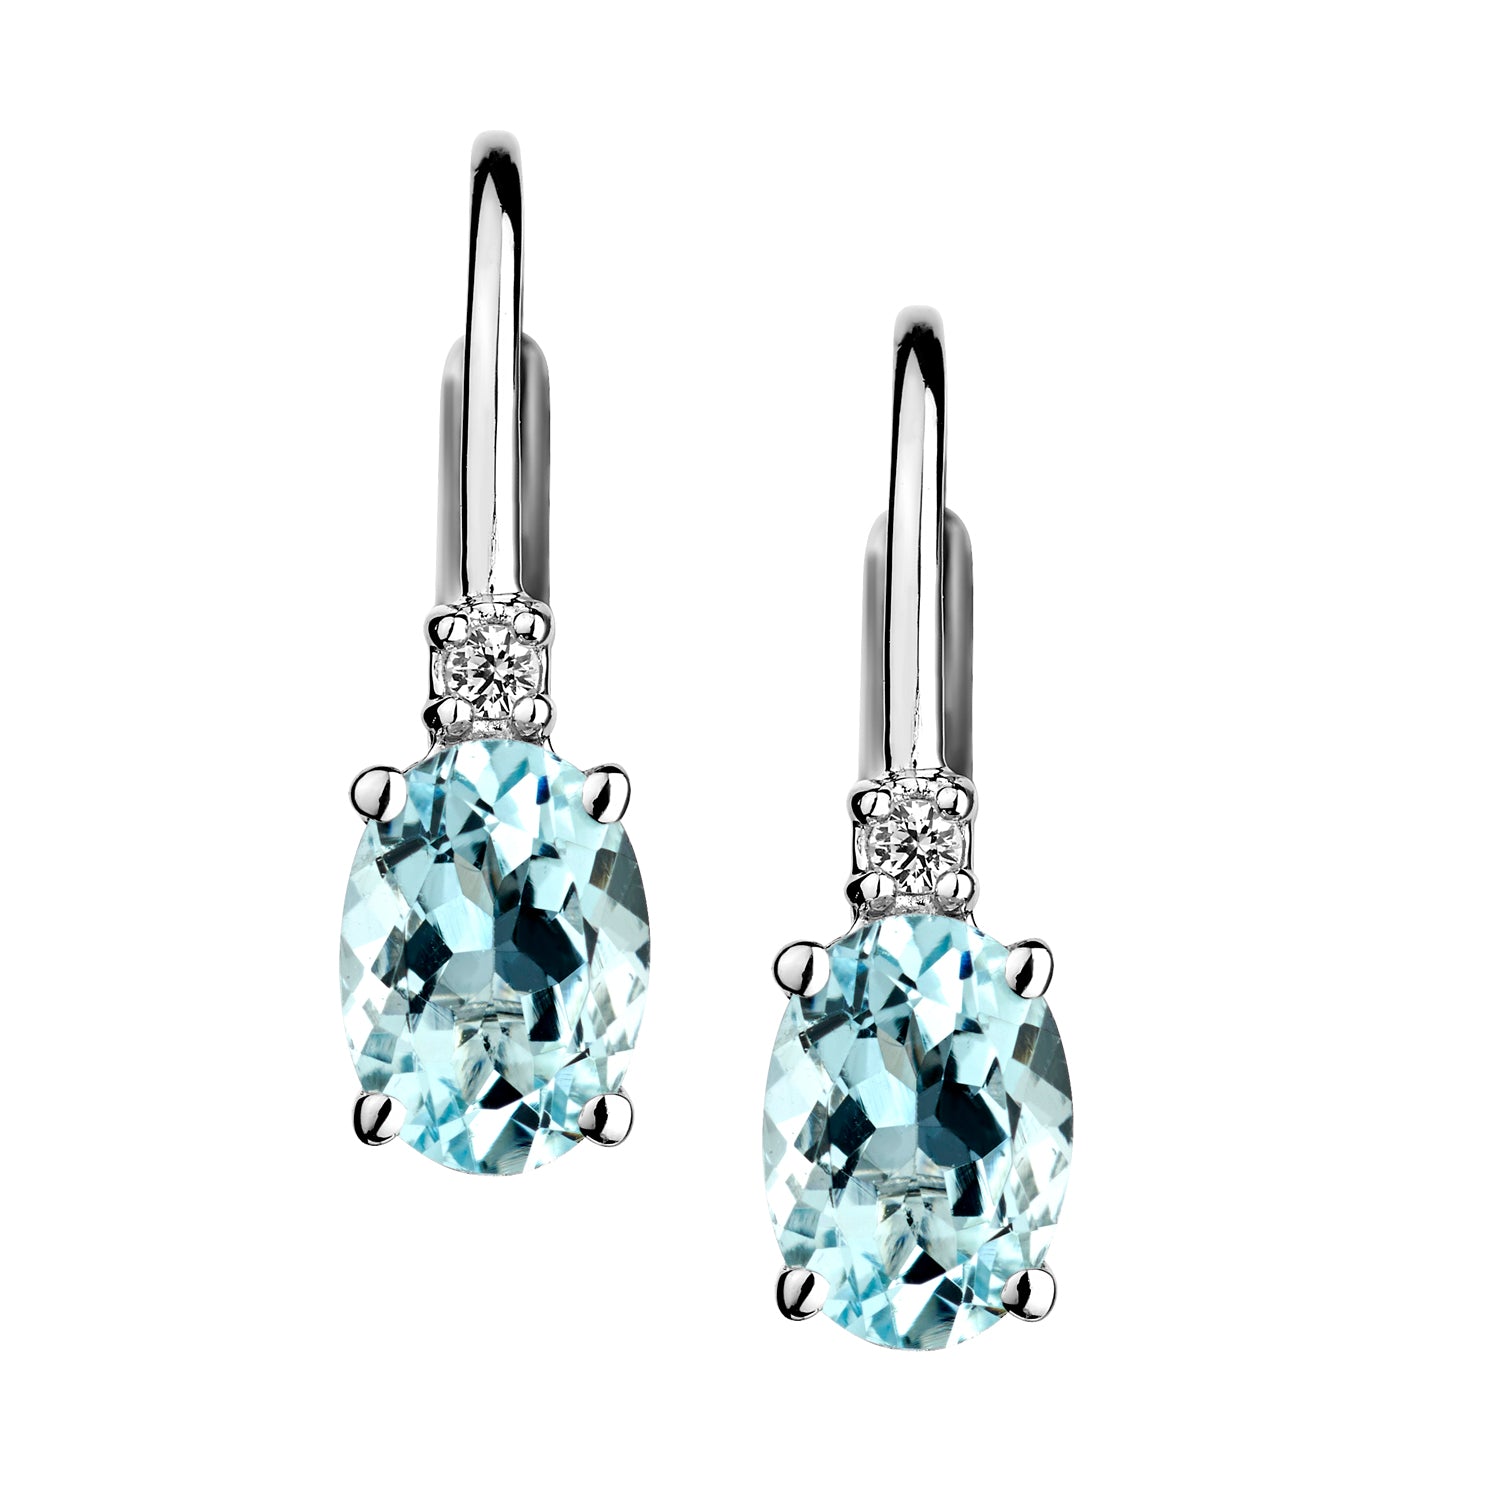 Genuine Aquamarine & White Sapphire Drop Earrings,  Sterling Silver. Griffin Jewellery Designs